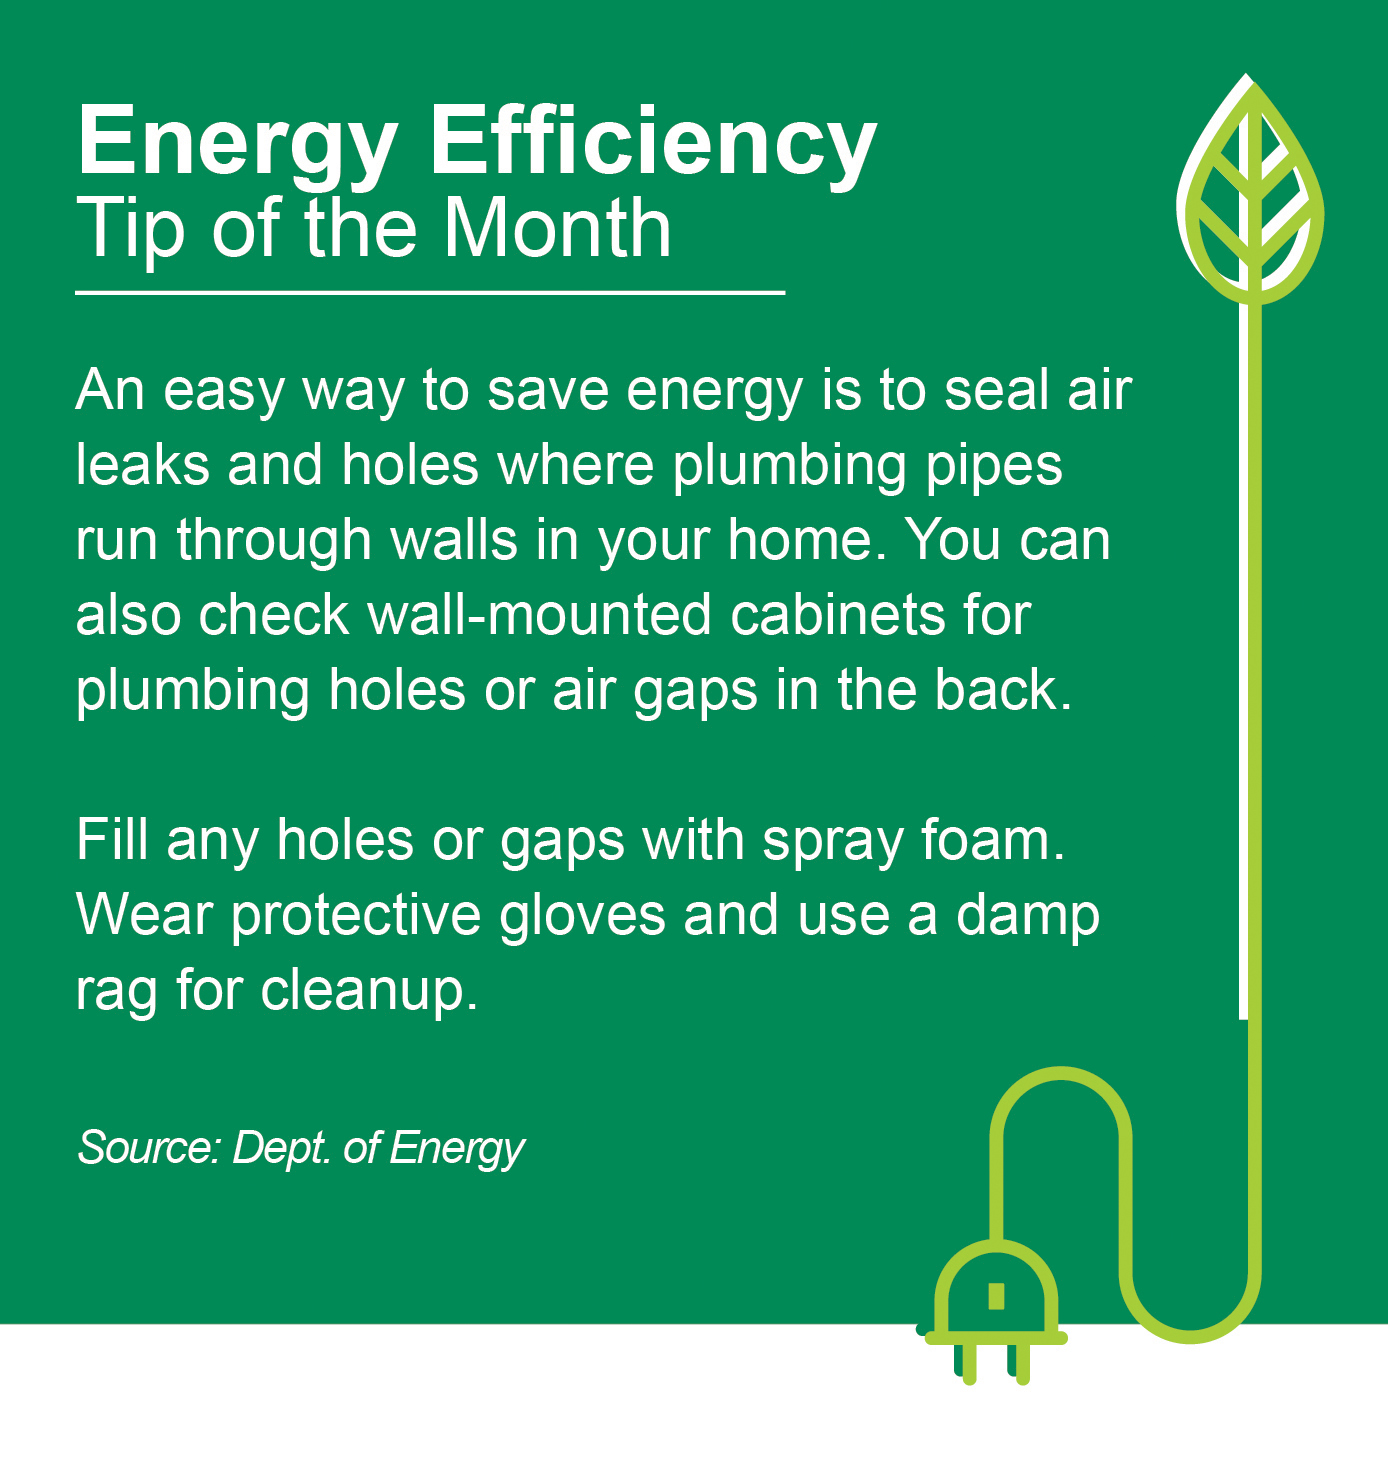 Energy Efficiency Tip of the Month: An easy way to save energy is to seal air leaks and holes where plumbing pipes run through walls in your home. You can also check wall-mounted cabinets for plumbing holes or air gaps in the back. Fill any holes or gaps with spray foam. Wear protective gloves and use a damp rug for cleanup. Source: Dept. of Energy